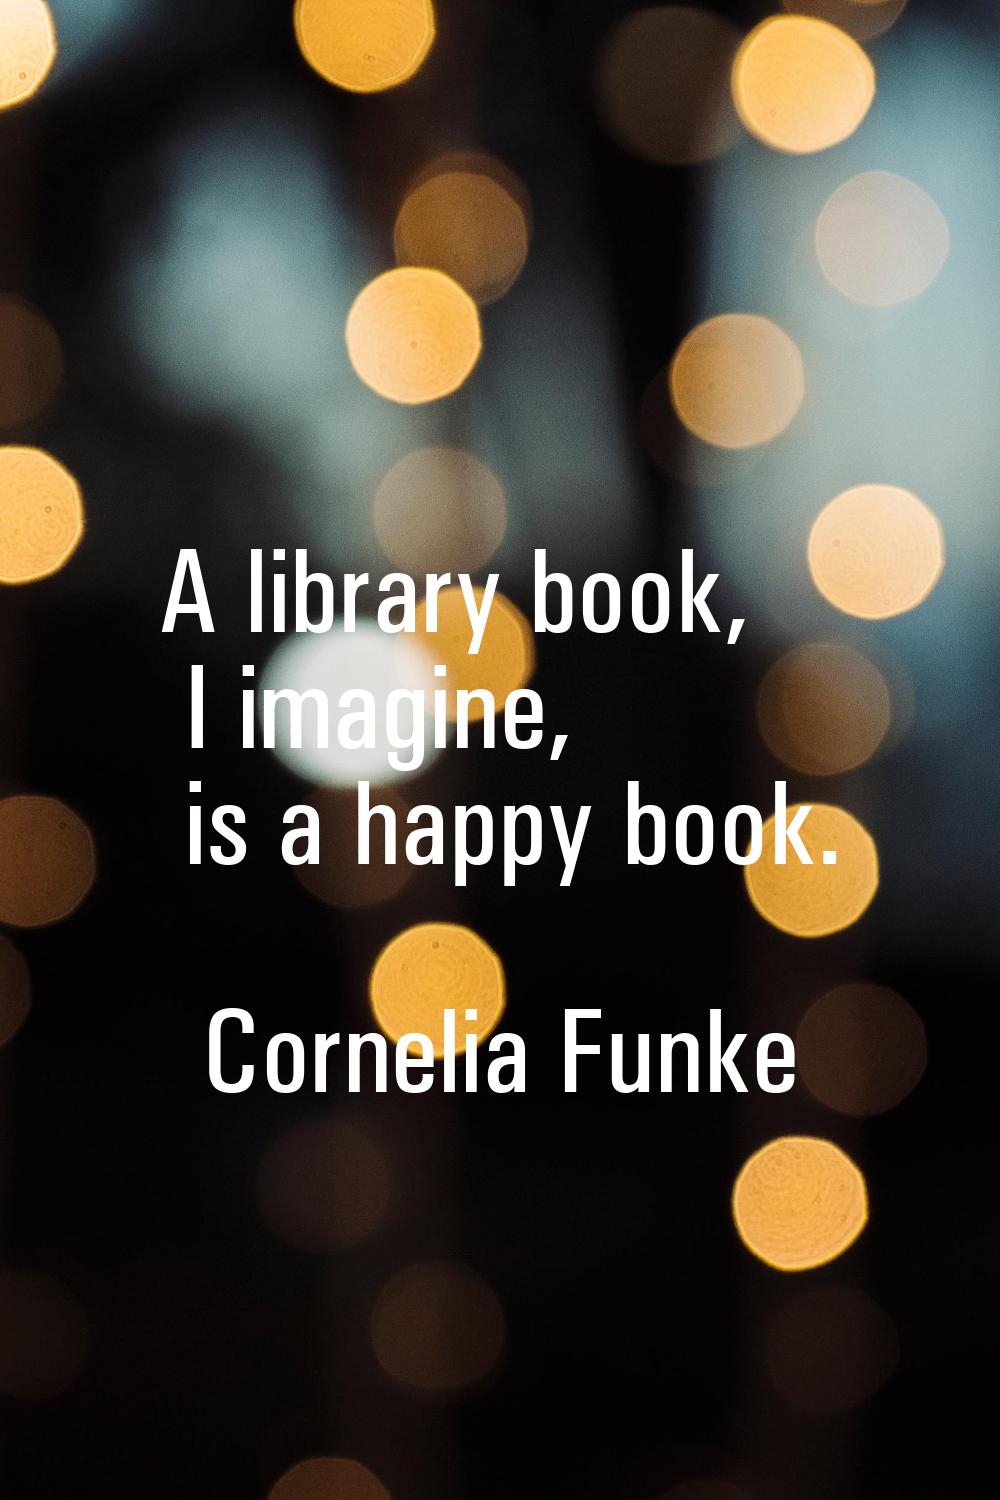 A library book, I imagine, is a happy book.